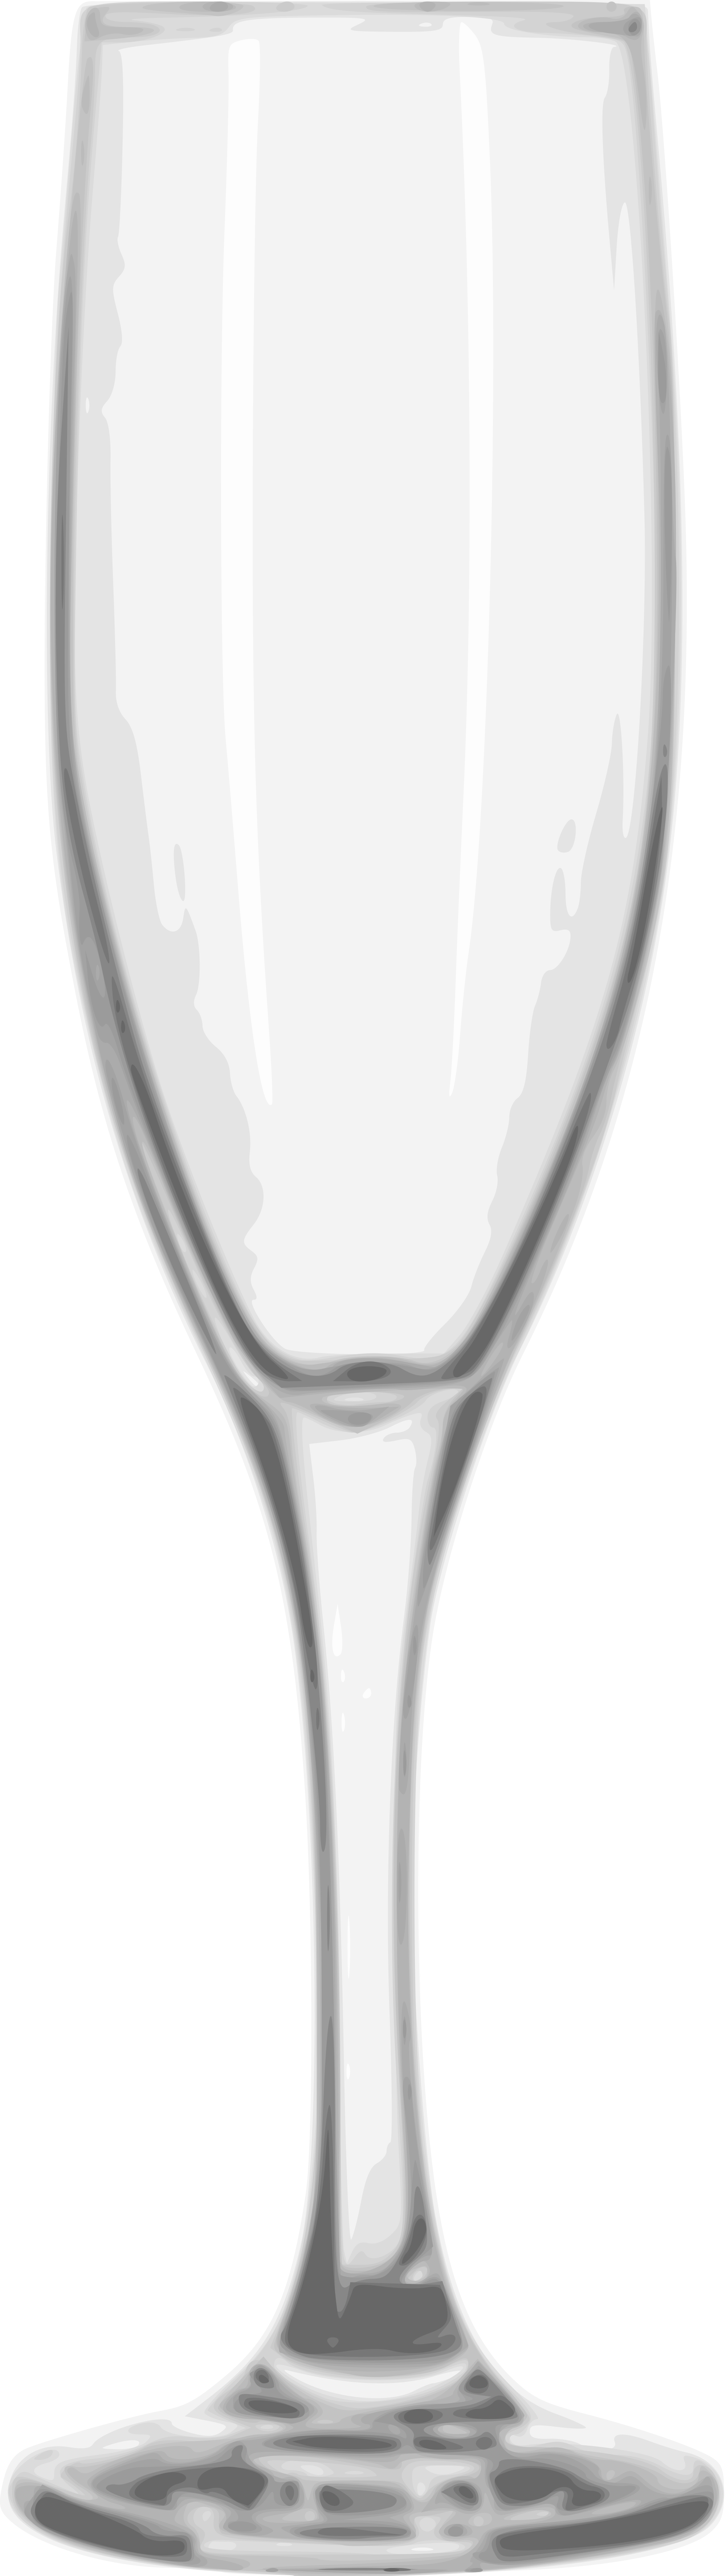 Flute Glass Png Champagne Flute Glass Png